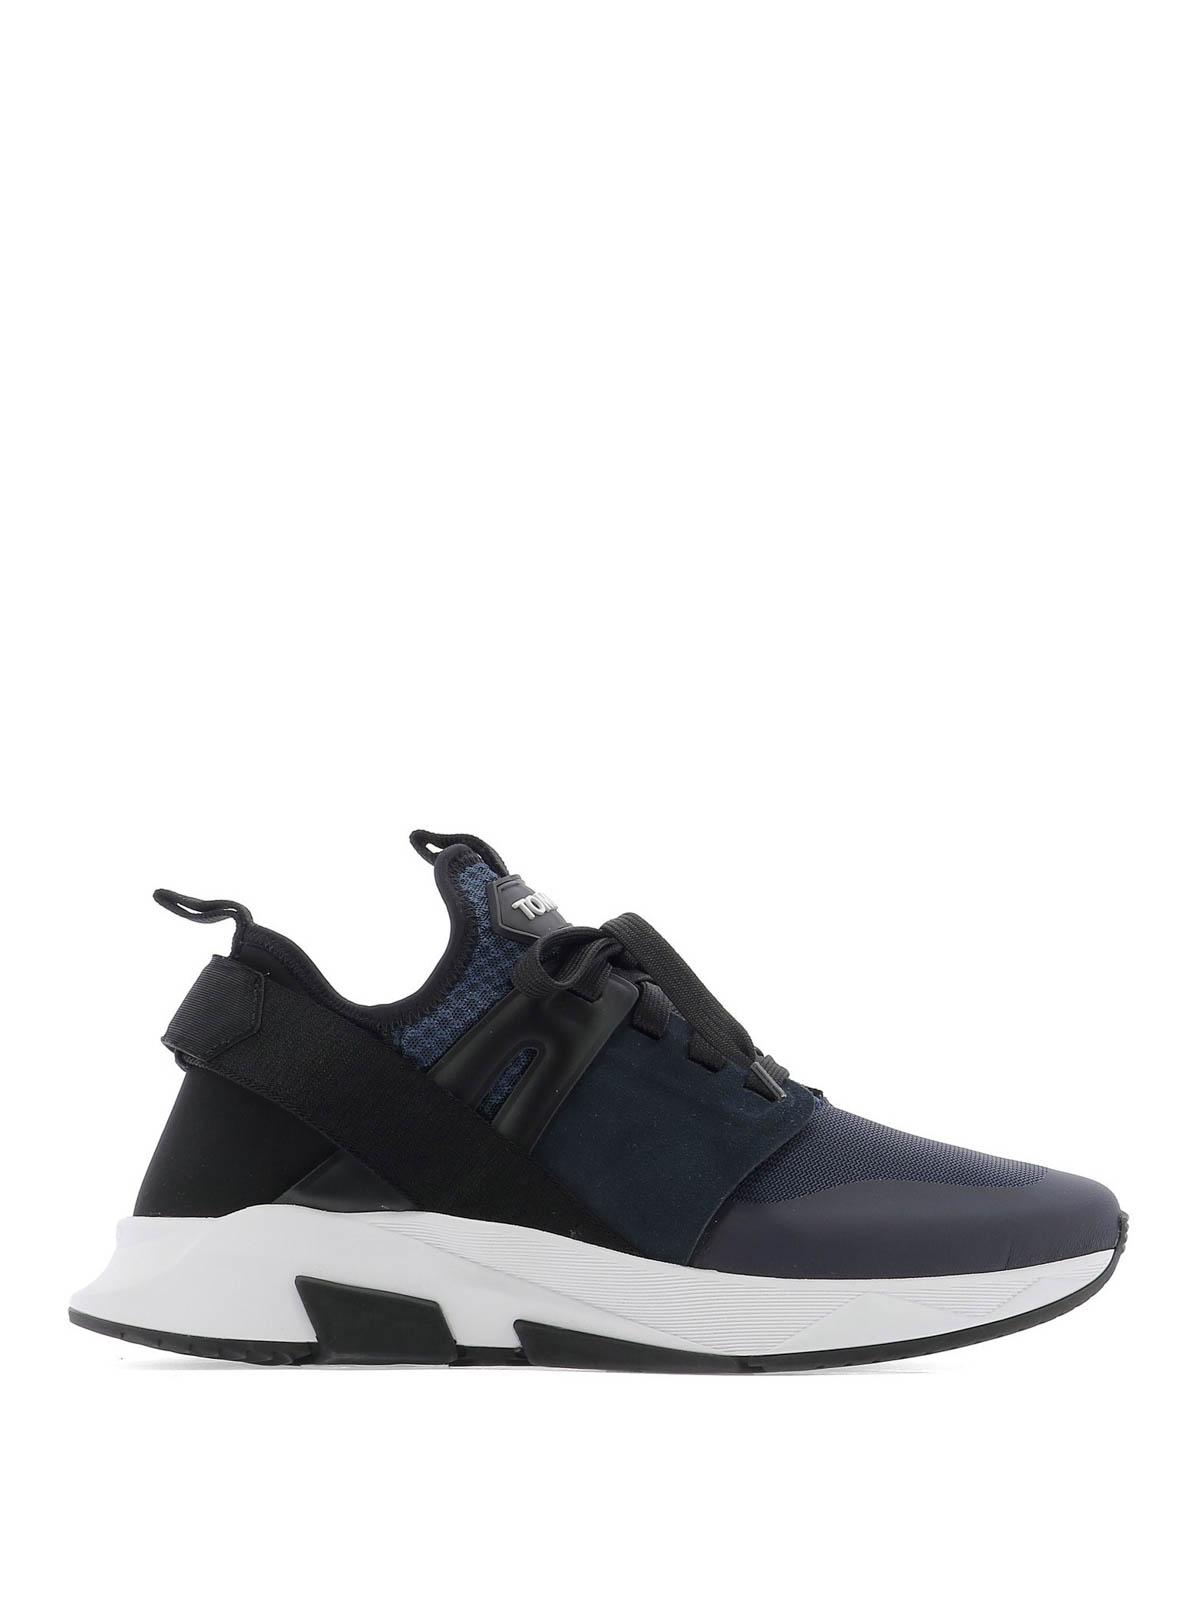 Tom Ford Synthetic Jago Nylon Sneakers in Blue for Men - Lyst